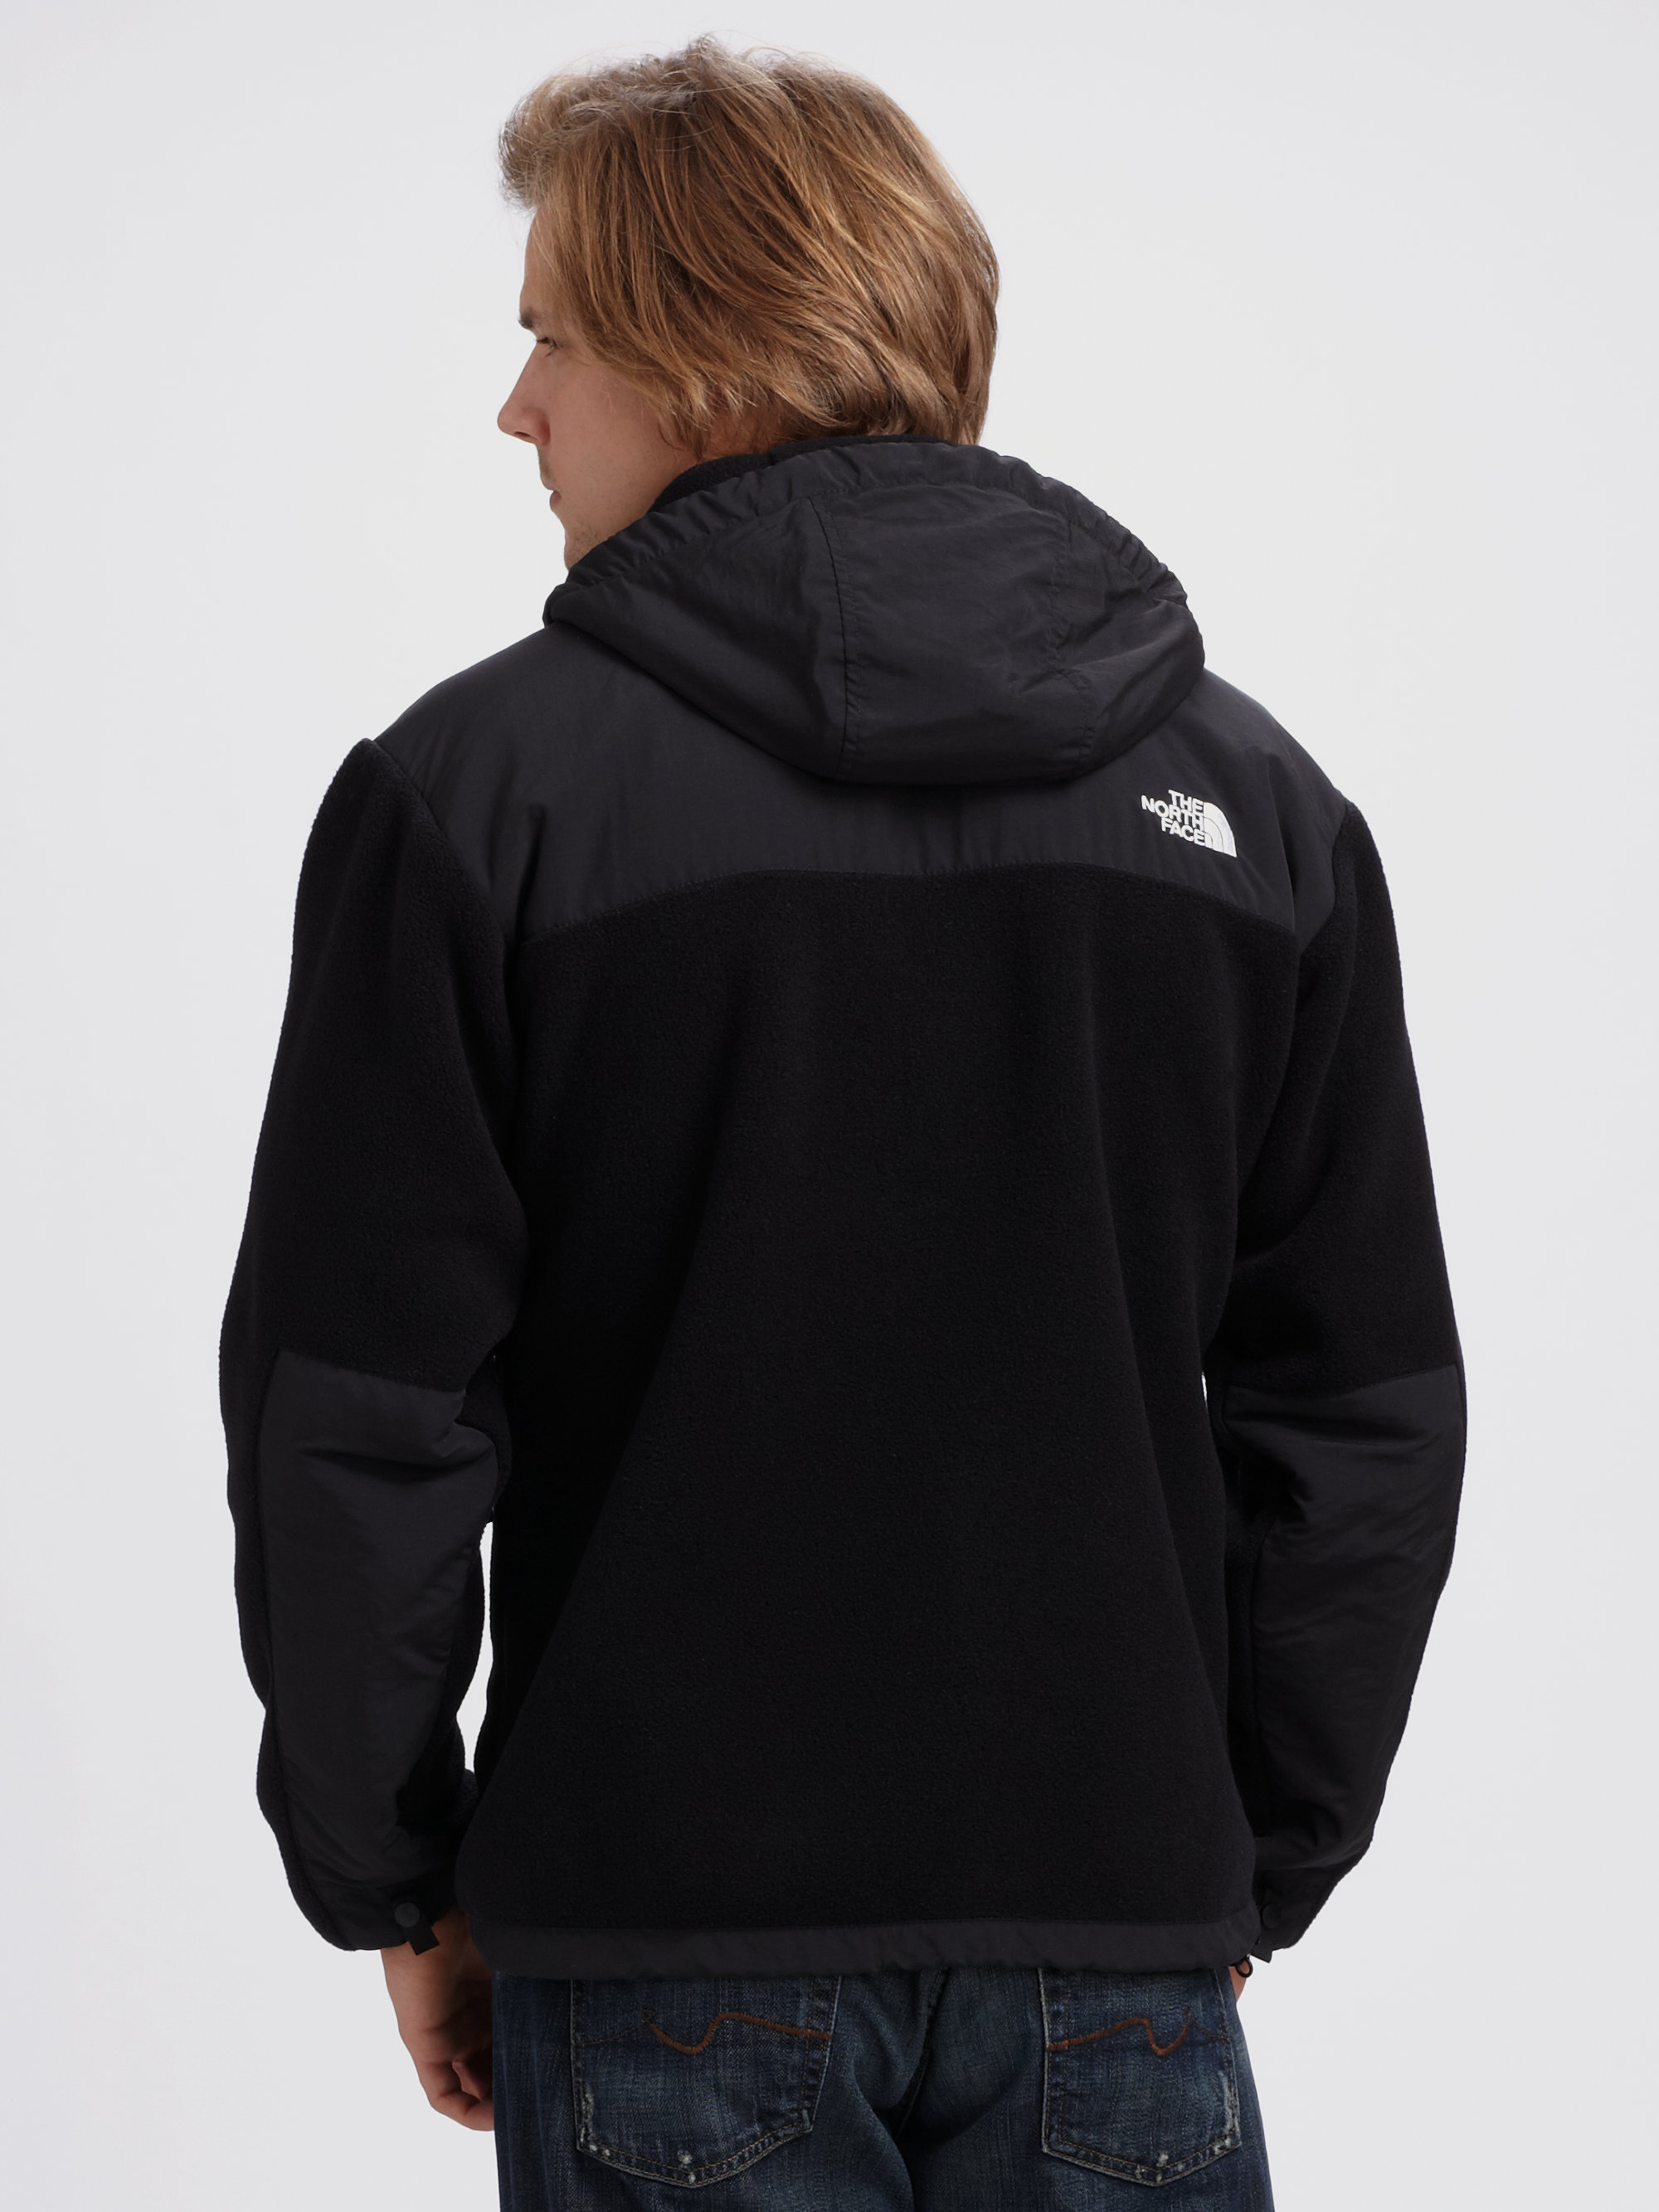 Lyst - The North Face Hooded Fleece Jacket in Black for Men